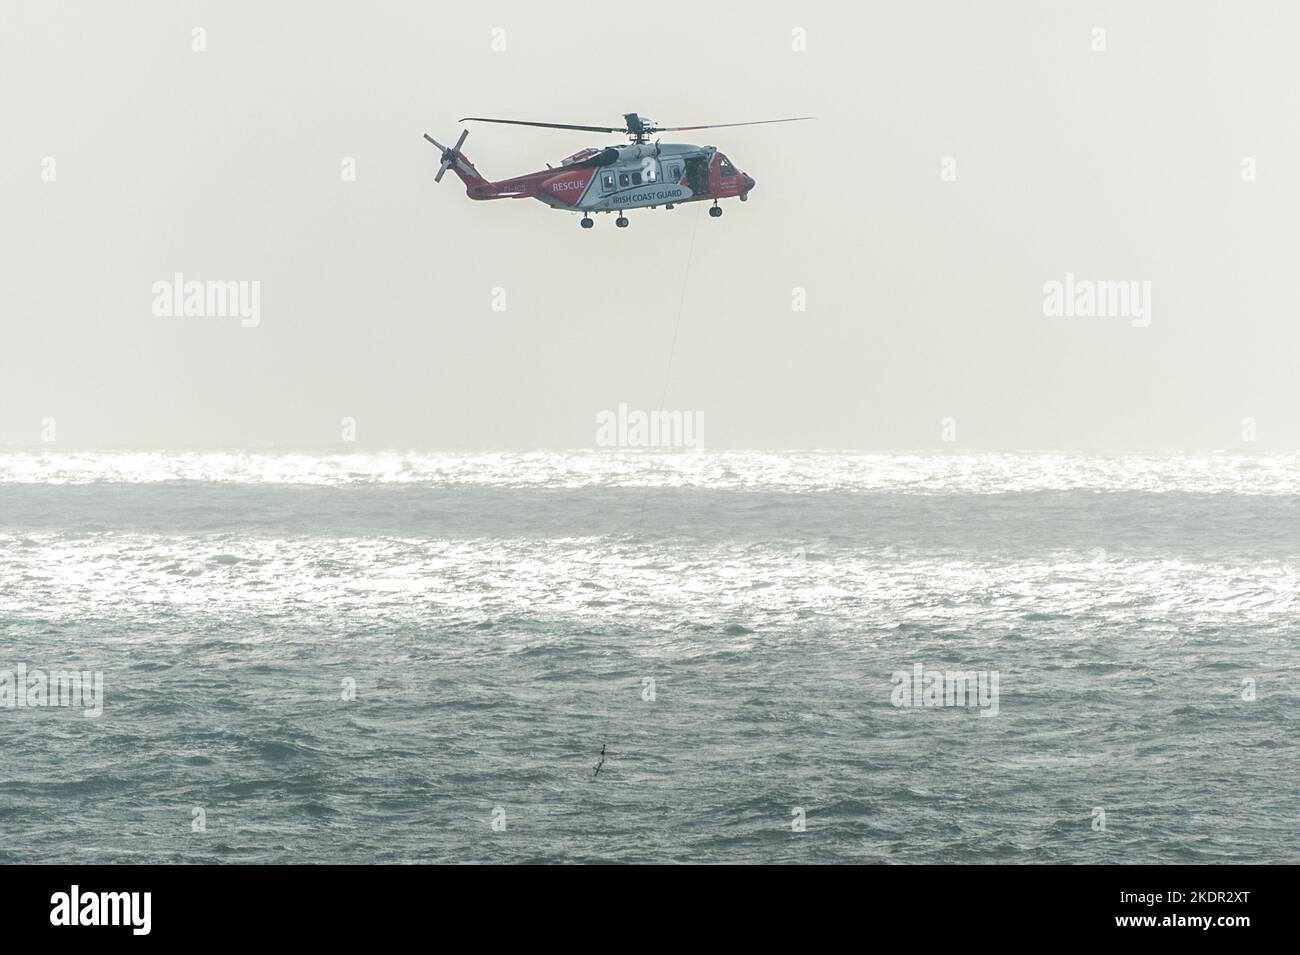 Tramore, Co. Waterford, Ireland. 8th Nov, 2022. The Irish Coastguard helicopter, Rescue 115, conducted a winching exercise in Tramore Bay this morning. The helicopter hovered for around 20 minutes during the exercise before flying back to its base at Waterford Airport. Credit: AG News/Alamy Live News Stock Photo